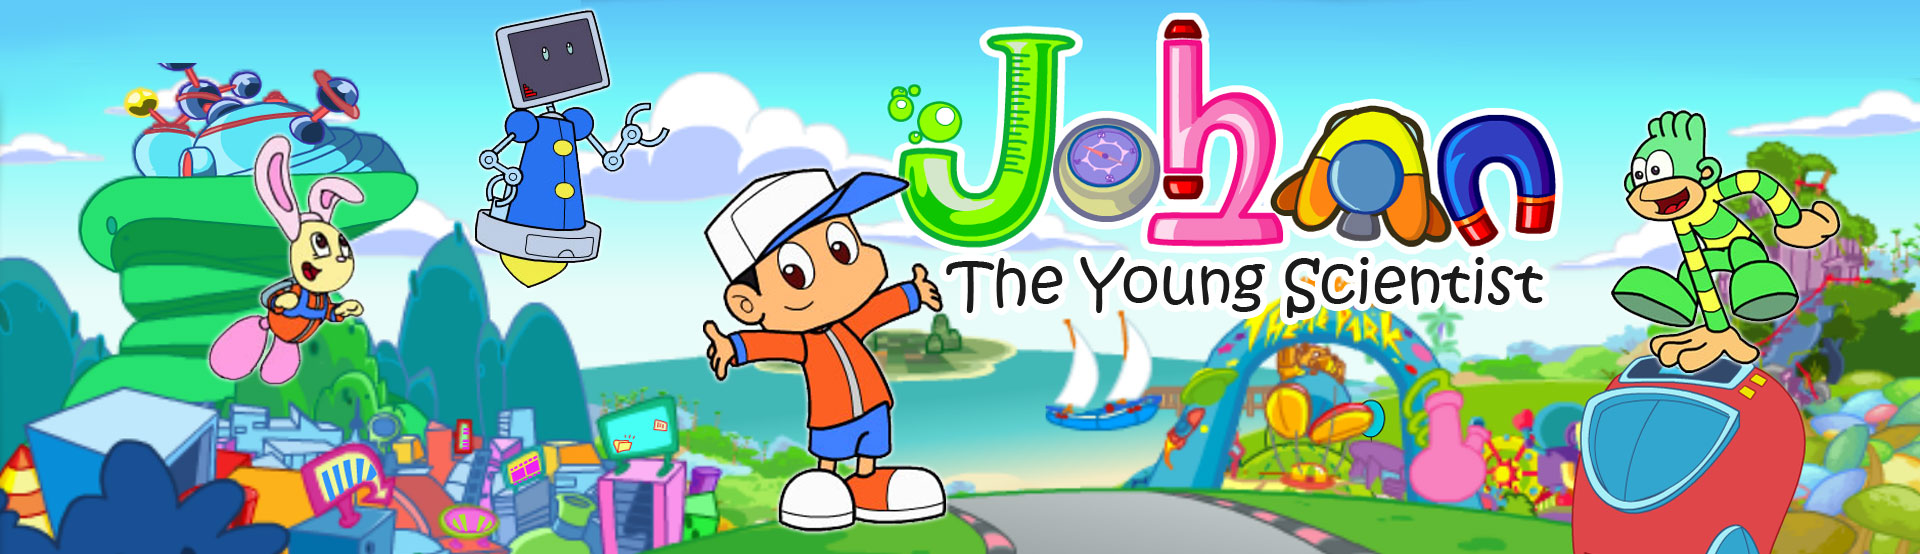 Johan: The Young Scientist